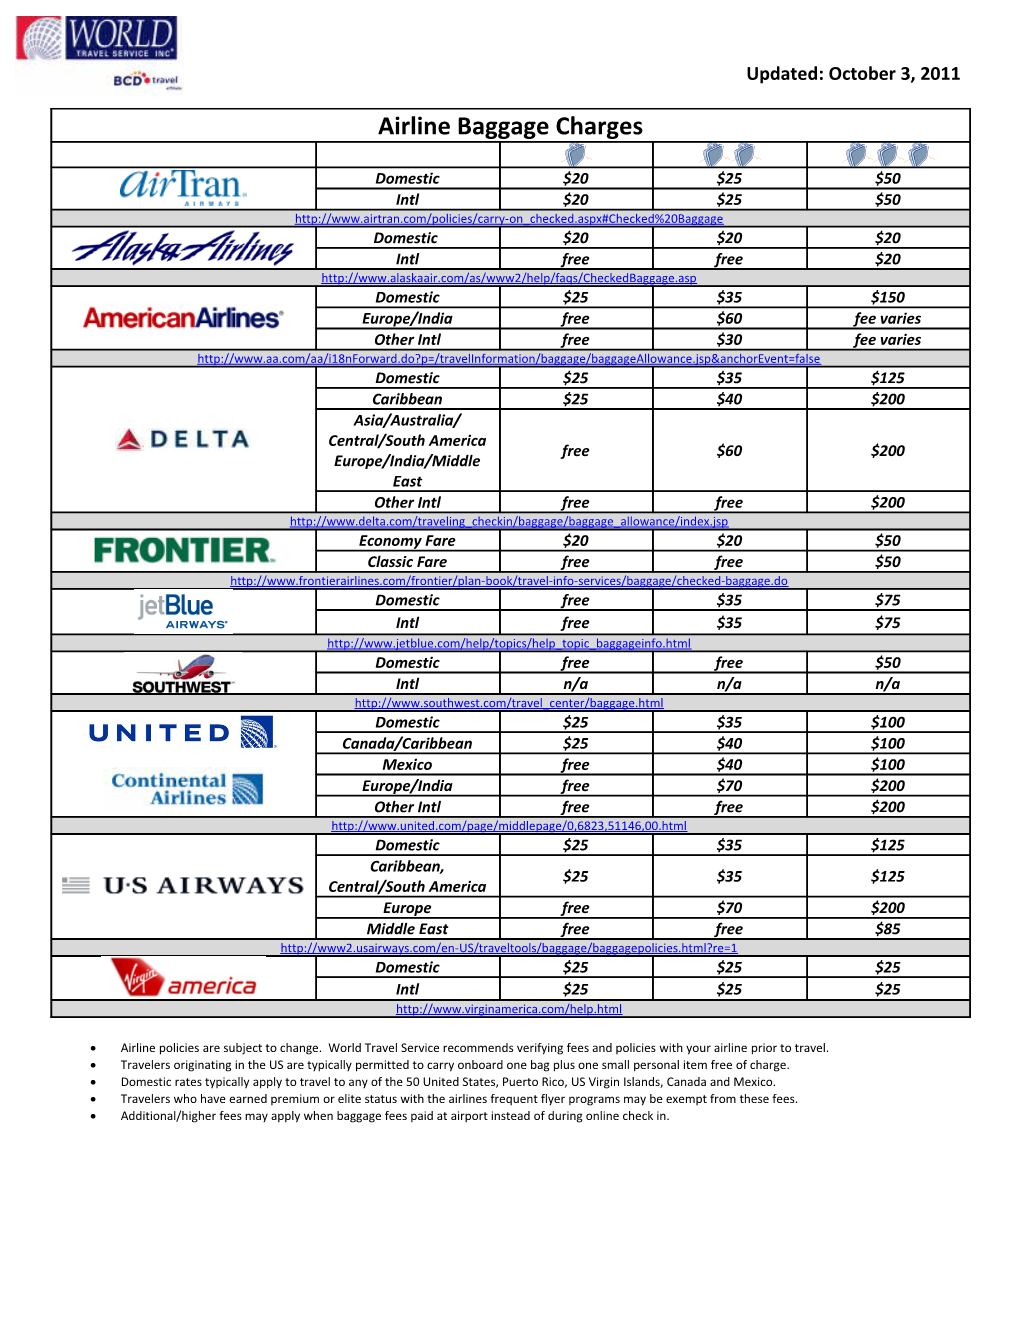 Domestic Airline Baggage Charges*